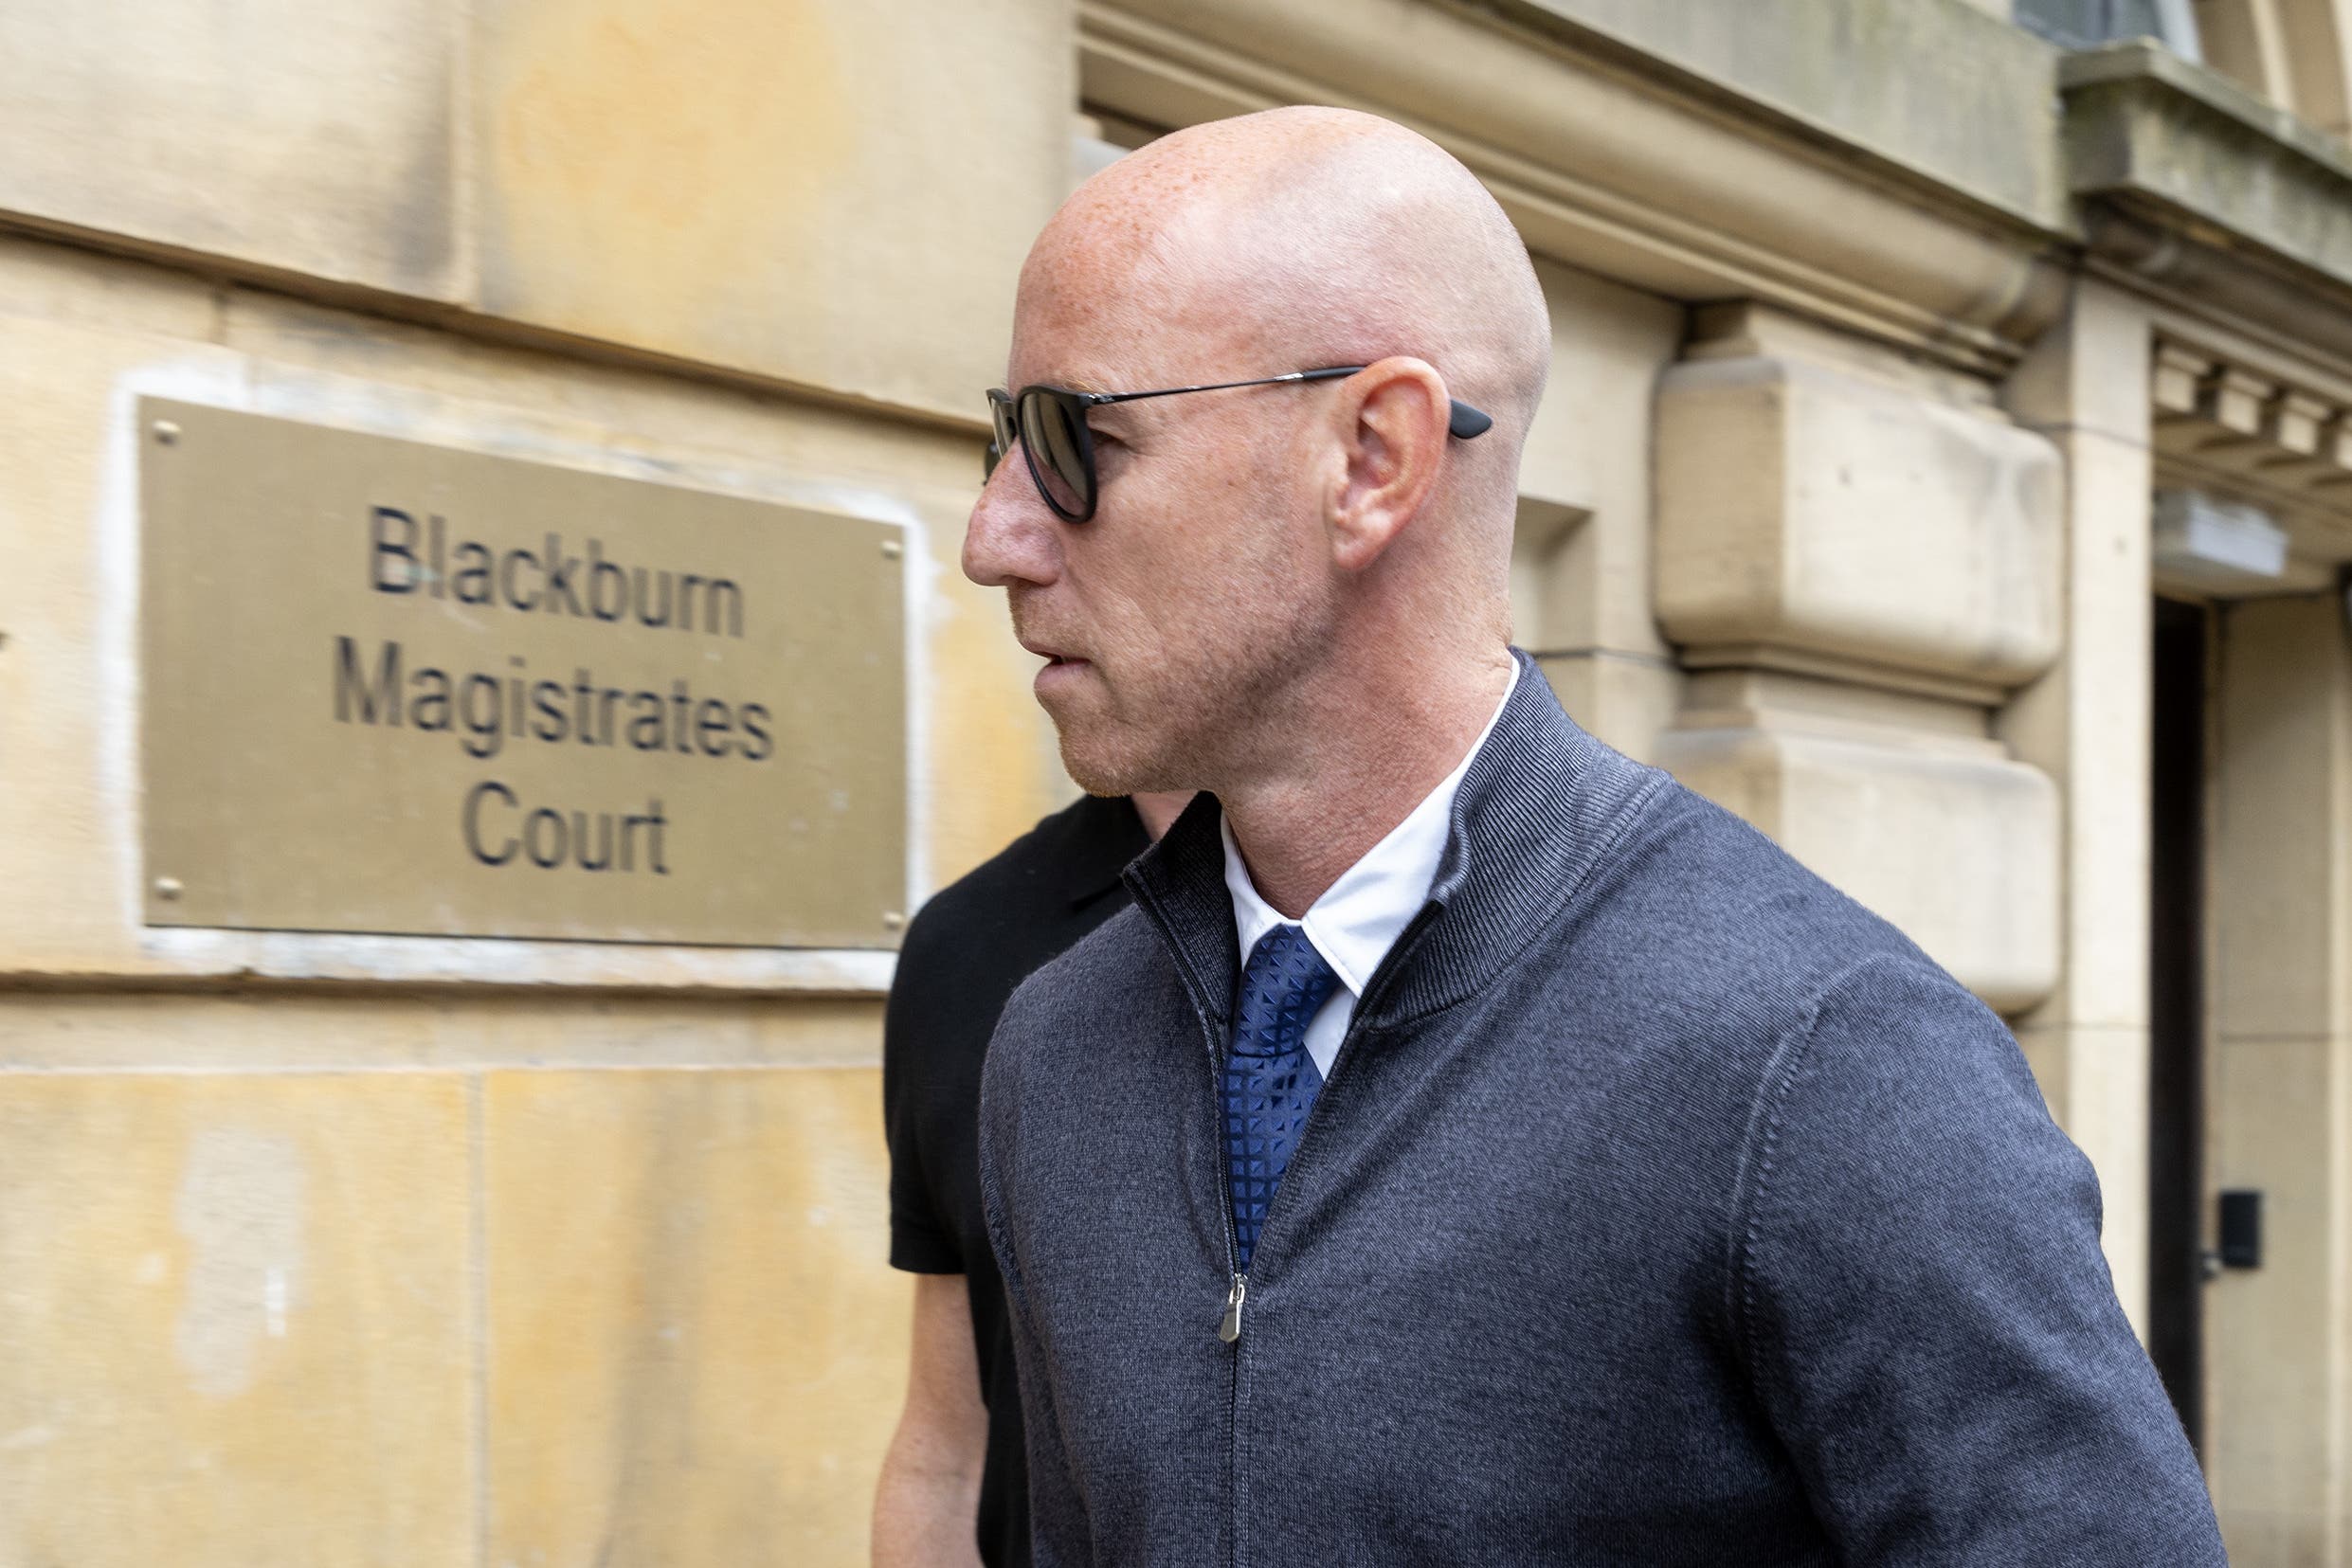 Ex-Manchester United player Nicky Butt arrives at Blackburn Magistrates’ Court (Ian Hodgson/PA)